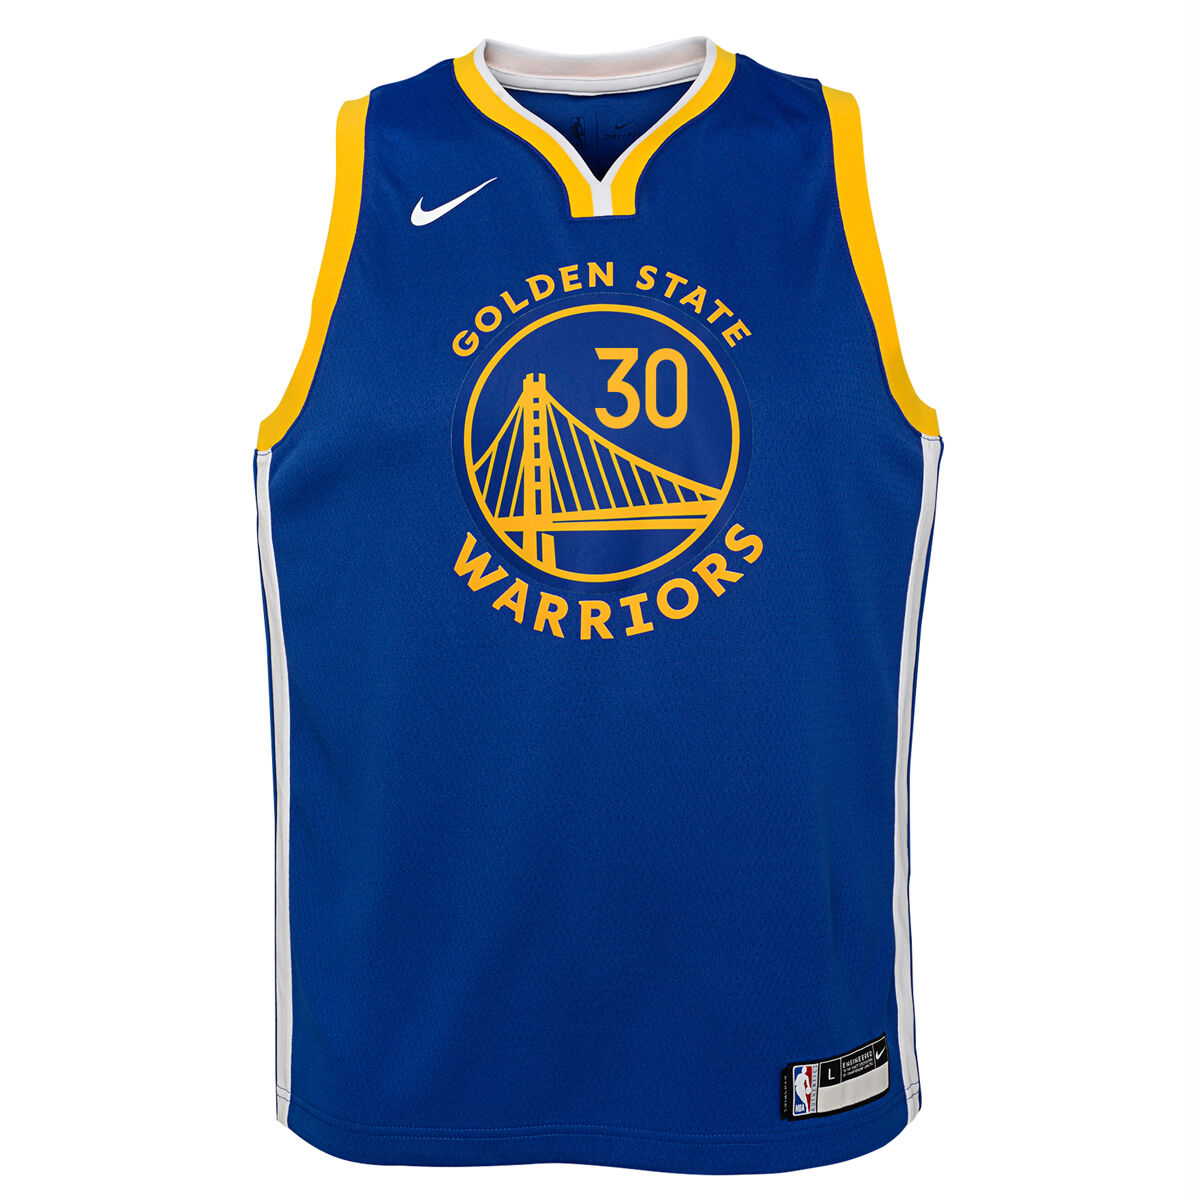 Youth Nike Stephen Curry White Golden State Warriors Hardwood